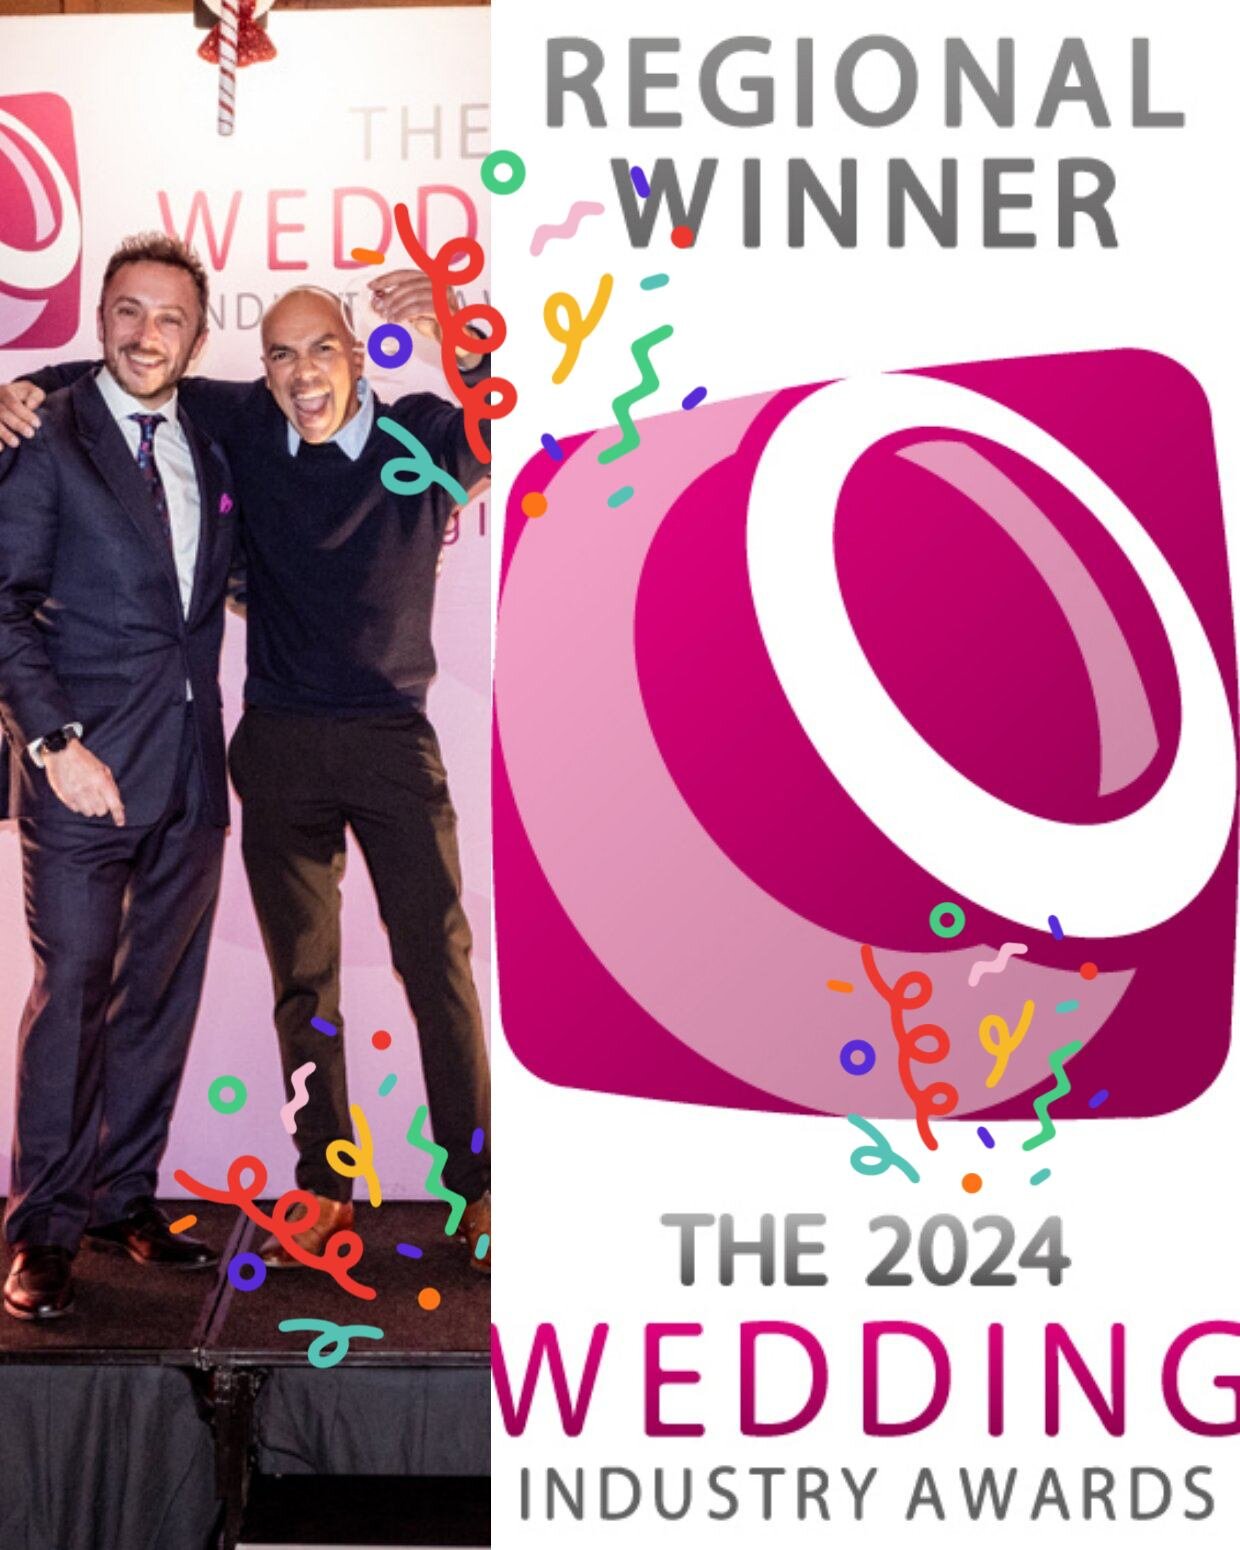 ONE DAY TO GO UNTIL THE NATIONAL AWARDS. 🥳🥳
Continued thanks to all our wedding couples from 2023 that voted for us and delivered such high praise. The best of luck to all other finalists. Here's to a great night tomorrow!
#twia24 &euro;#TWIA #func